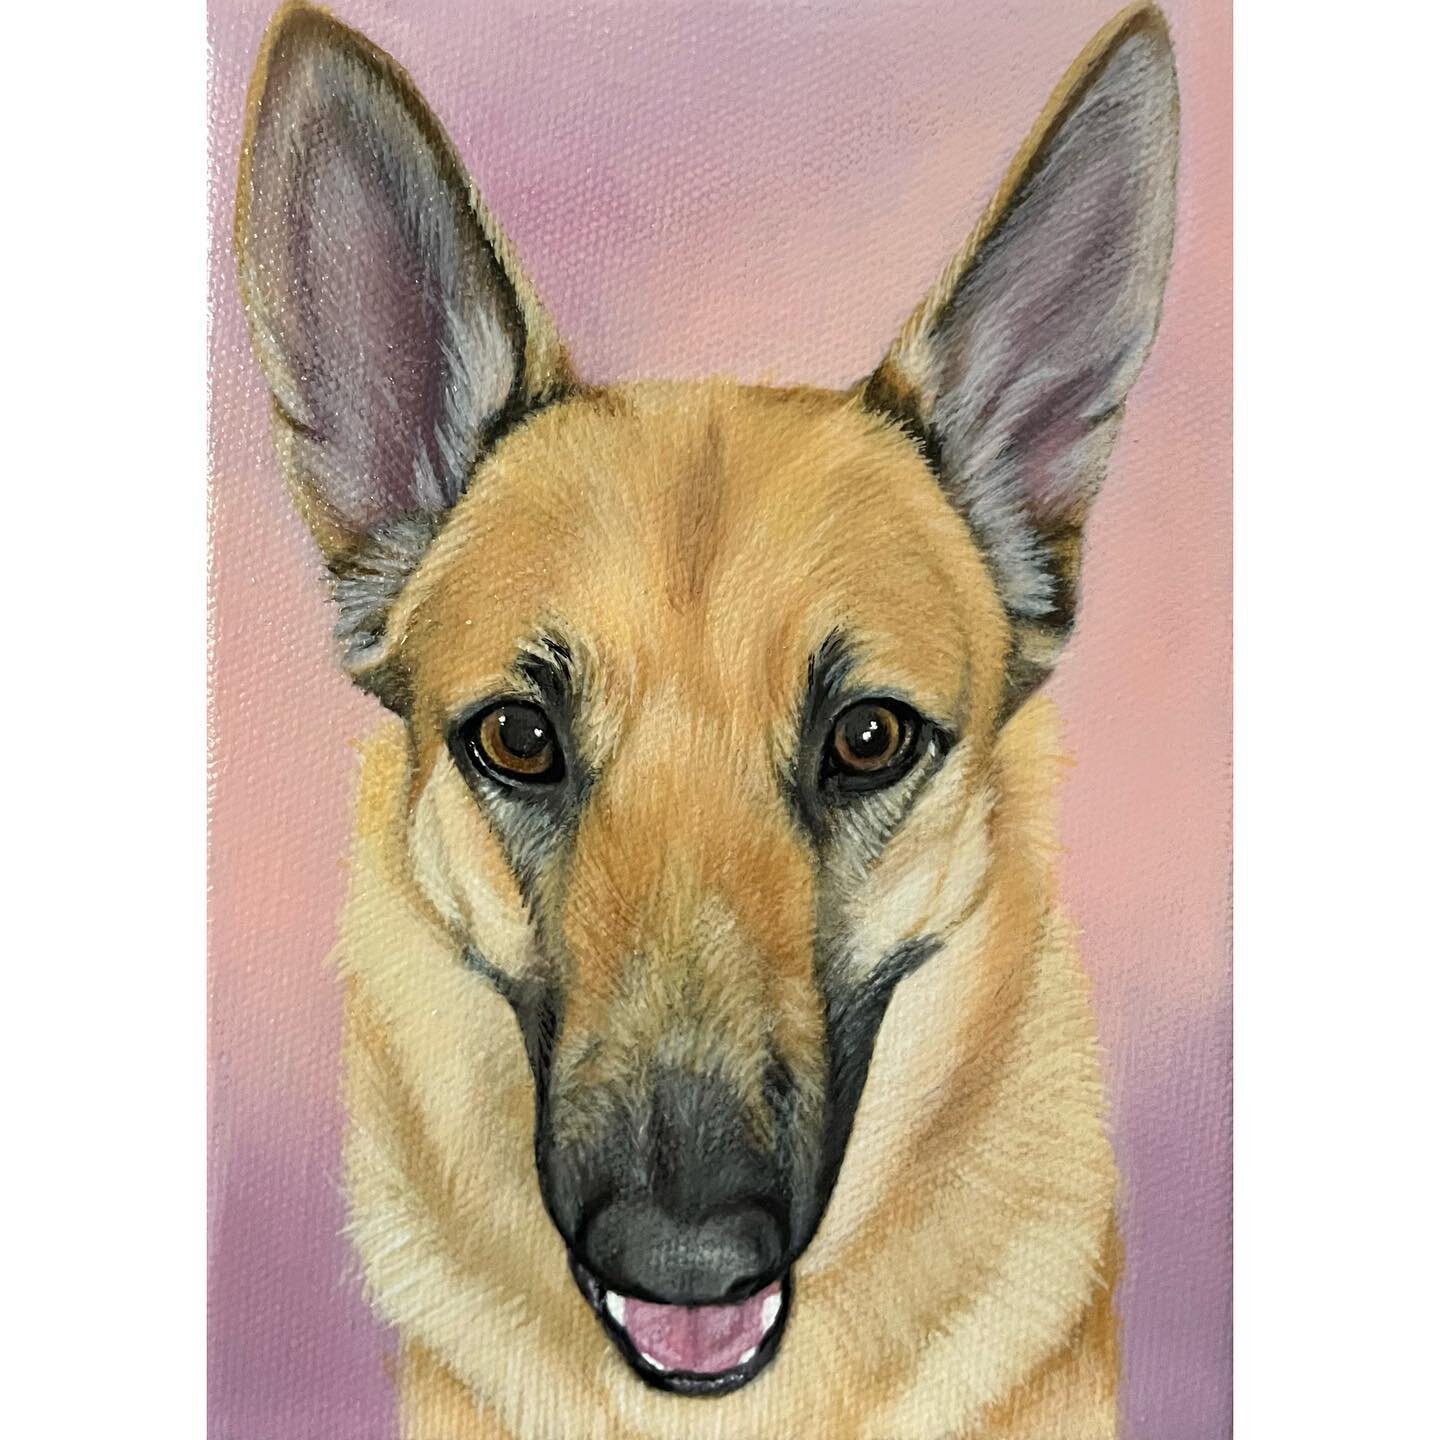 🌸 Aspen 🌸 
A gifted portrait for a hurting friend. When we lost Olivia, I had friends bring us flowers, cookies, a thoughtful note with her name on a stone. Wow, that deeply mattered to us. LISTEN to the nudge. 😘

#lovedogs #shepherd #germanshephe